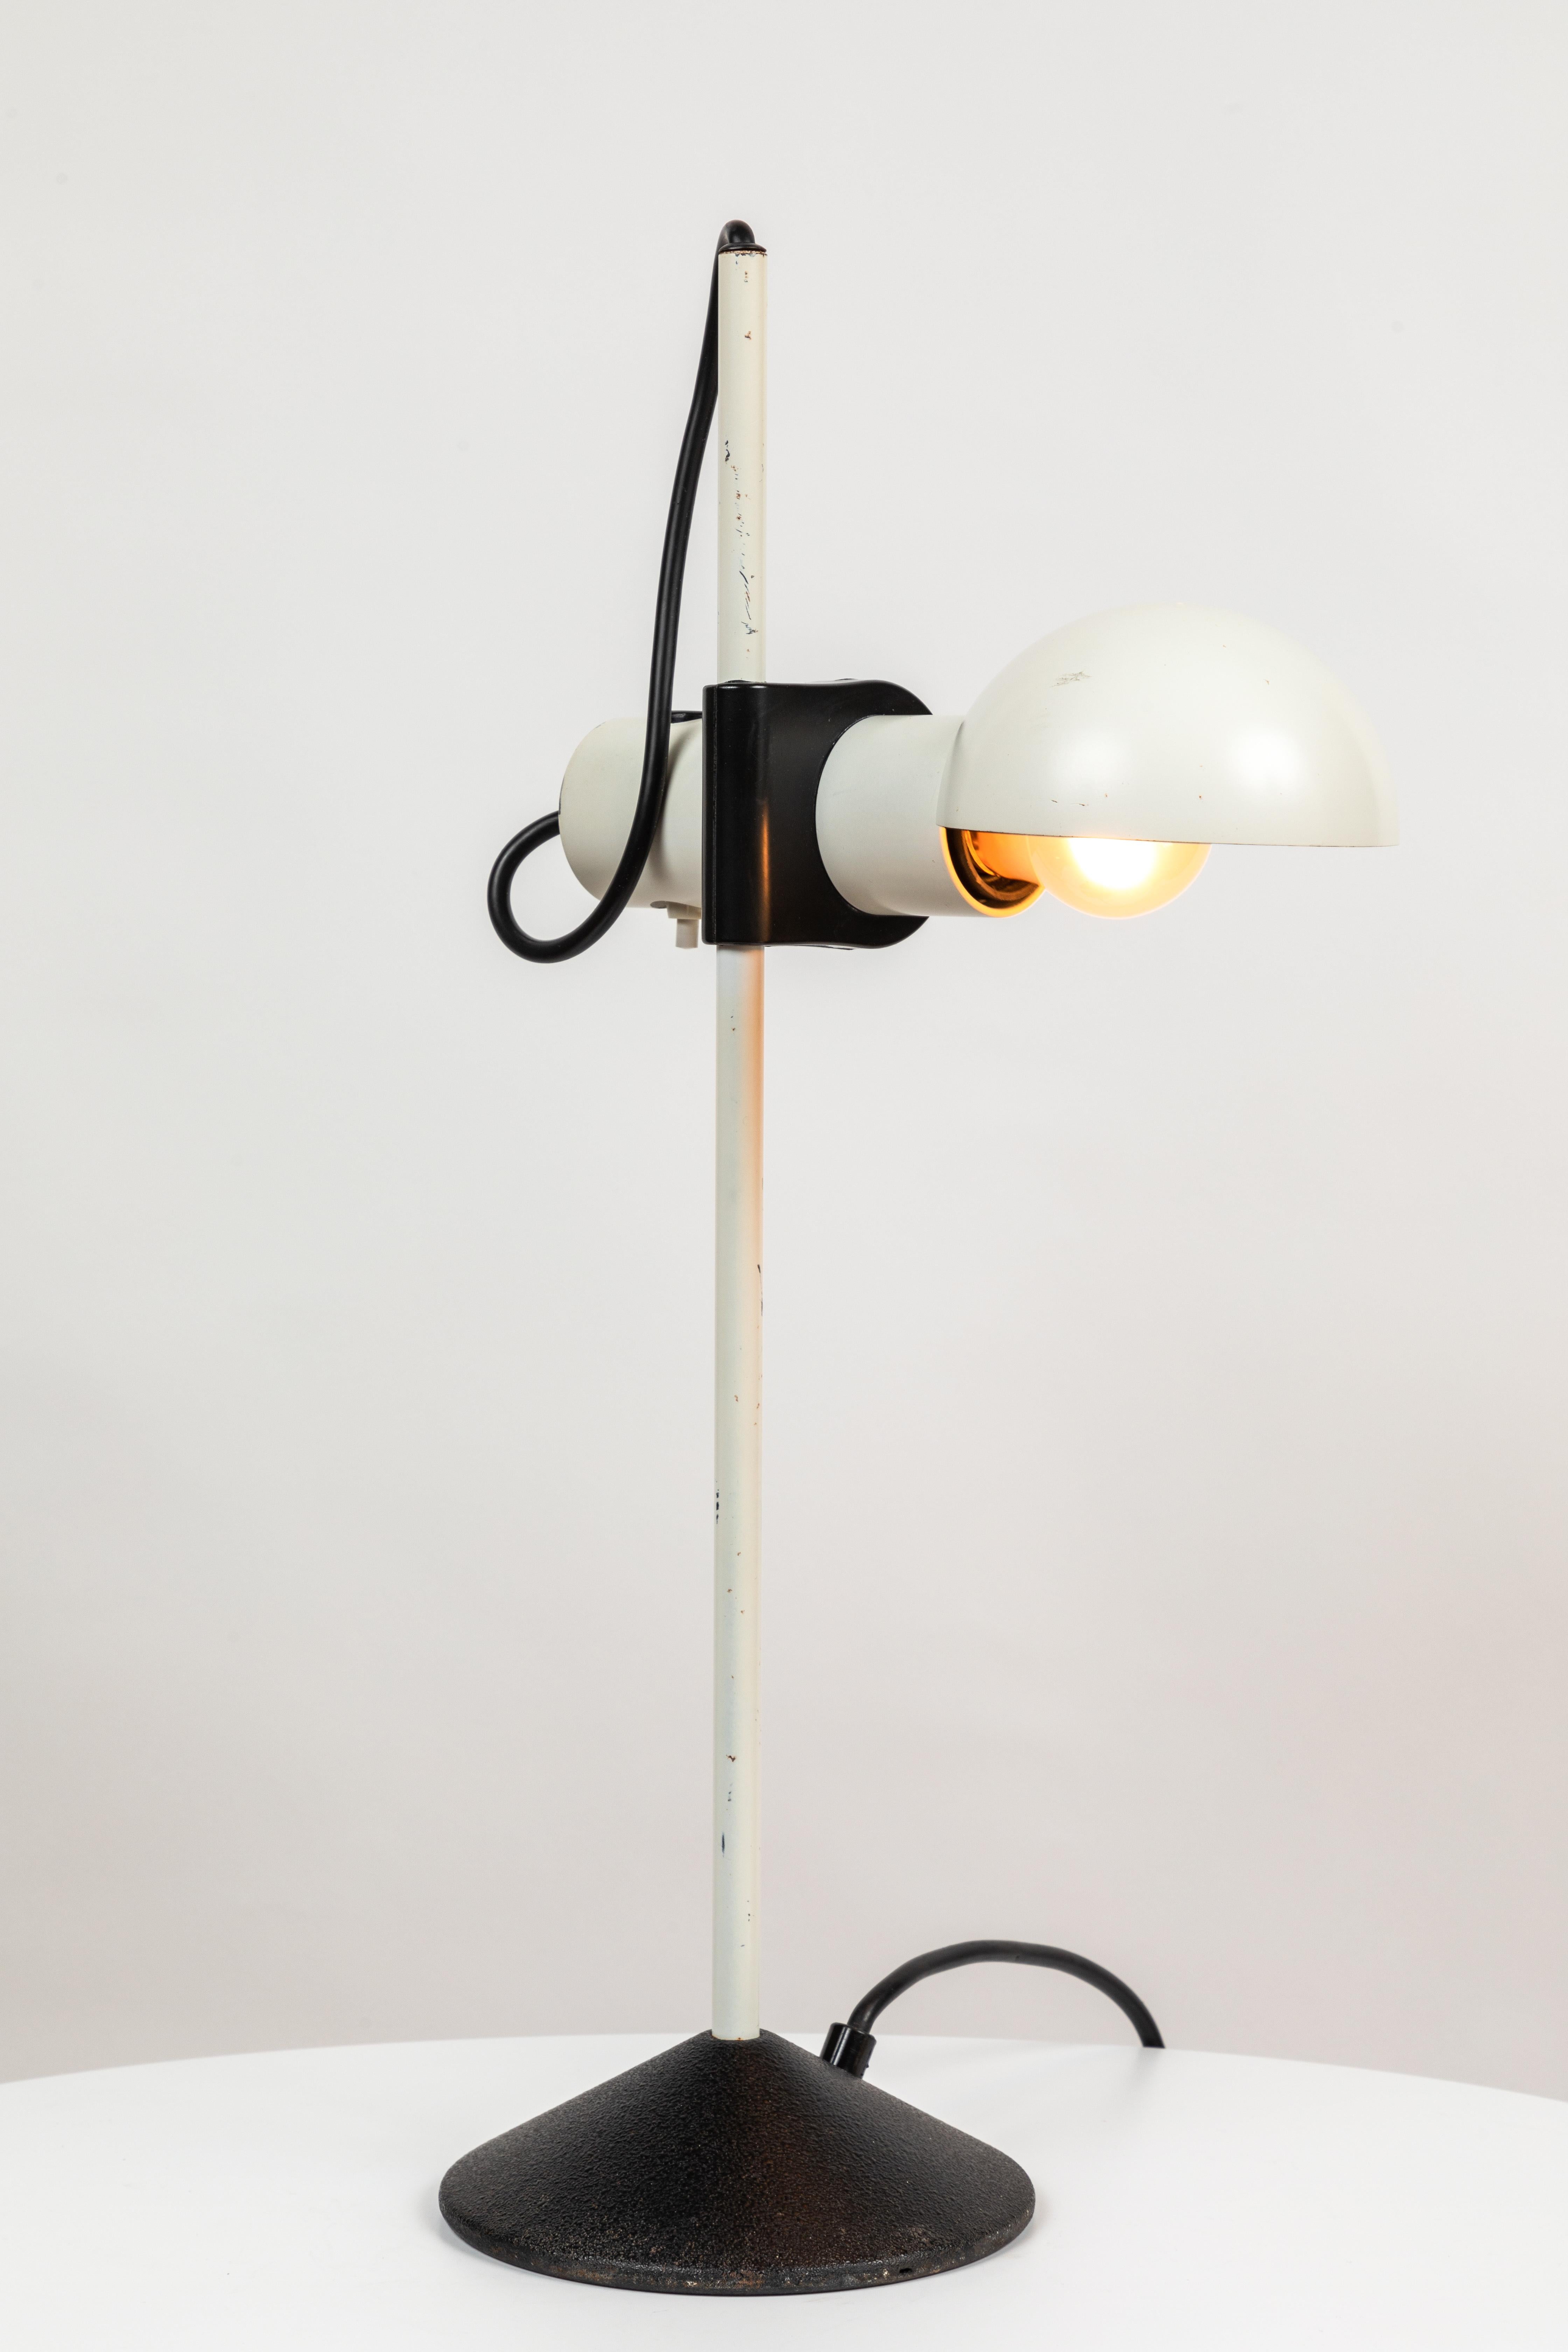 1980s Barbieri e Marianelli white table lamp for Tronconi. Executed in white matte metal with black chord. Shade rotates left and right. On/off switch on shade. A surprisingly bold yet refined Italian design, especially for the early 1980s.